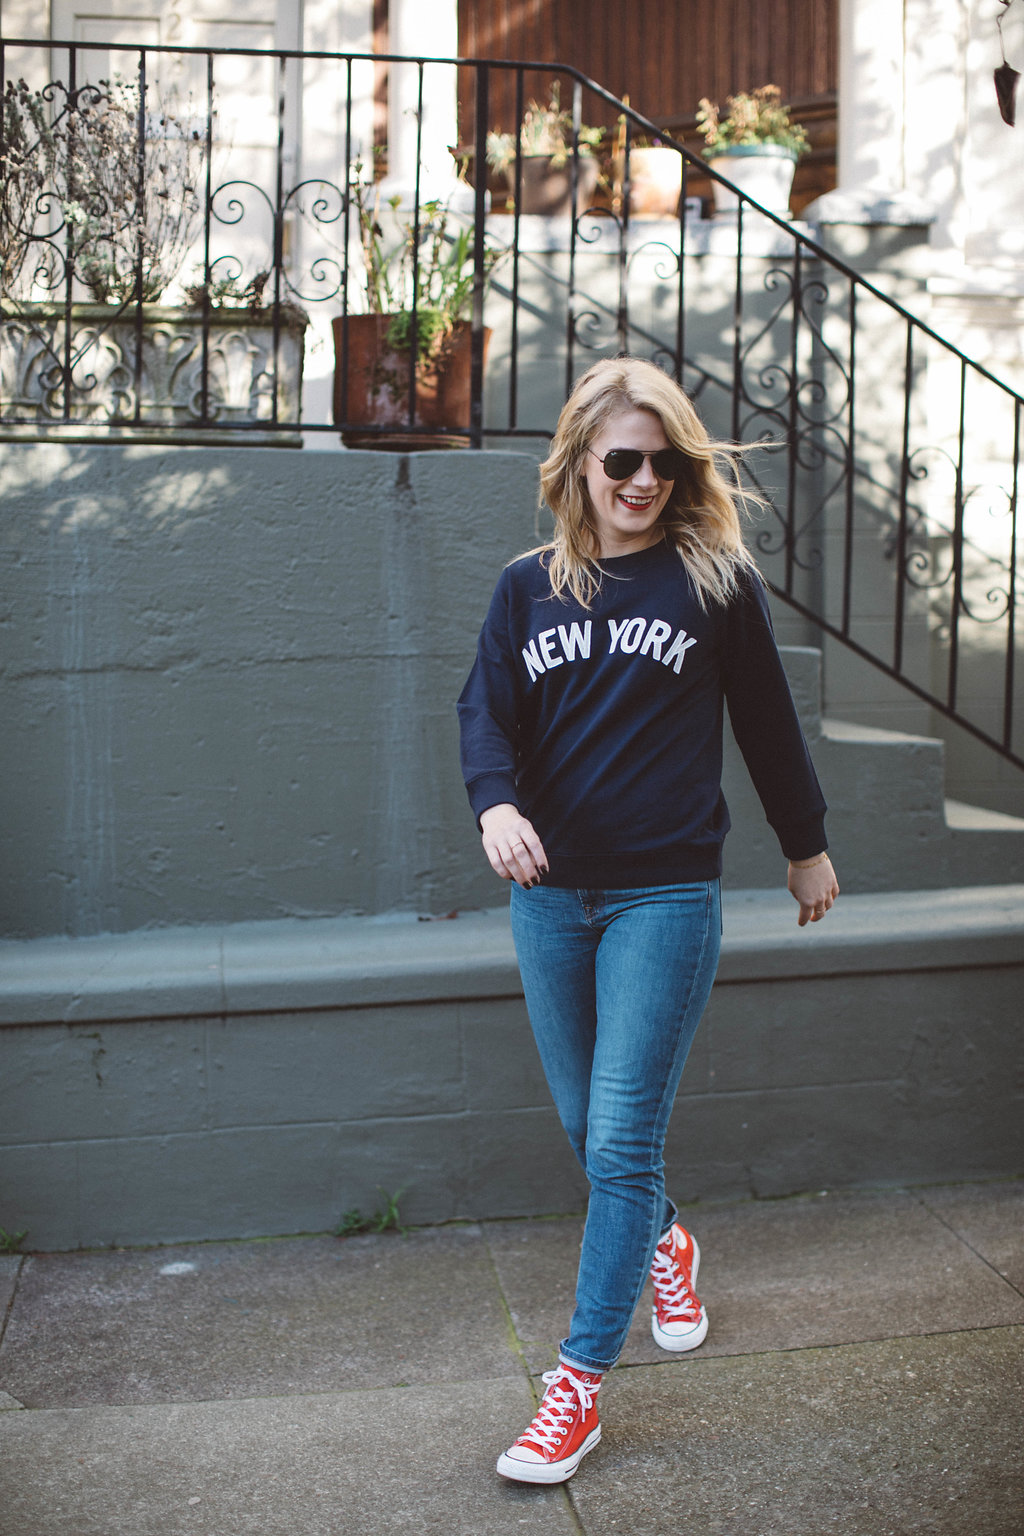 East Coast, Always. // J. Crew New York Sweatshirt paired with Everlane Denim and Chuck Taylor sneakers for a casual weekend look.